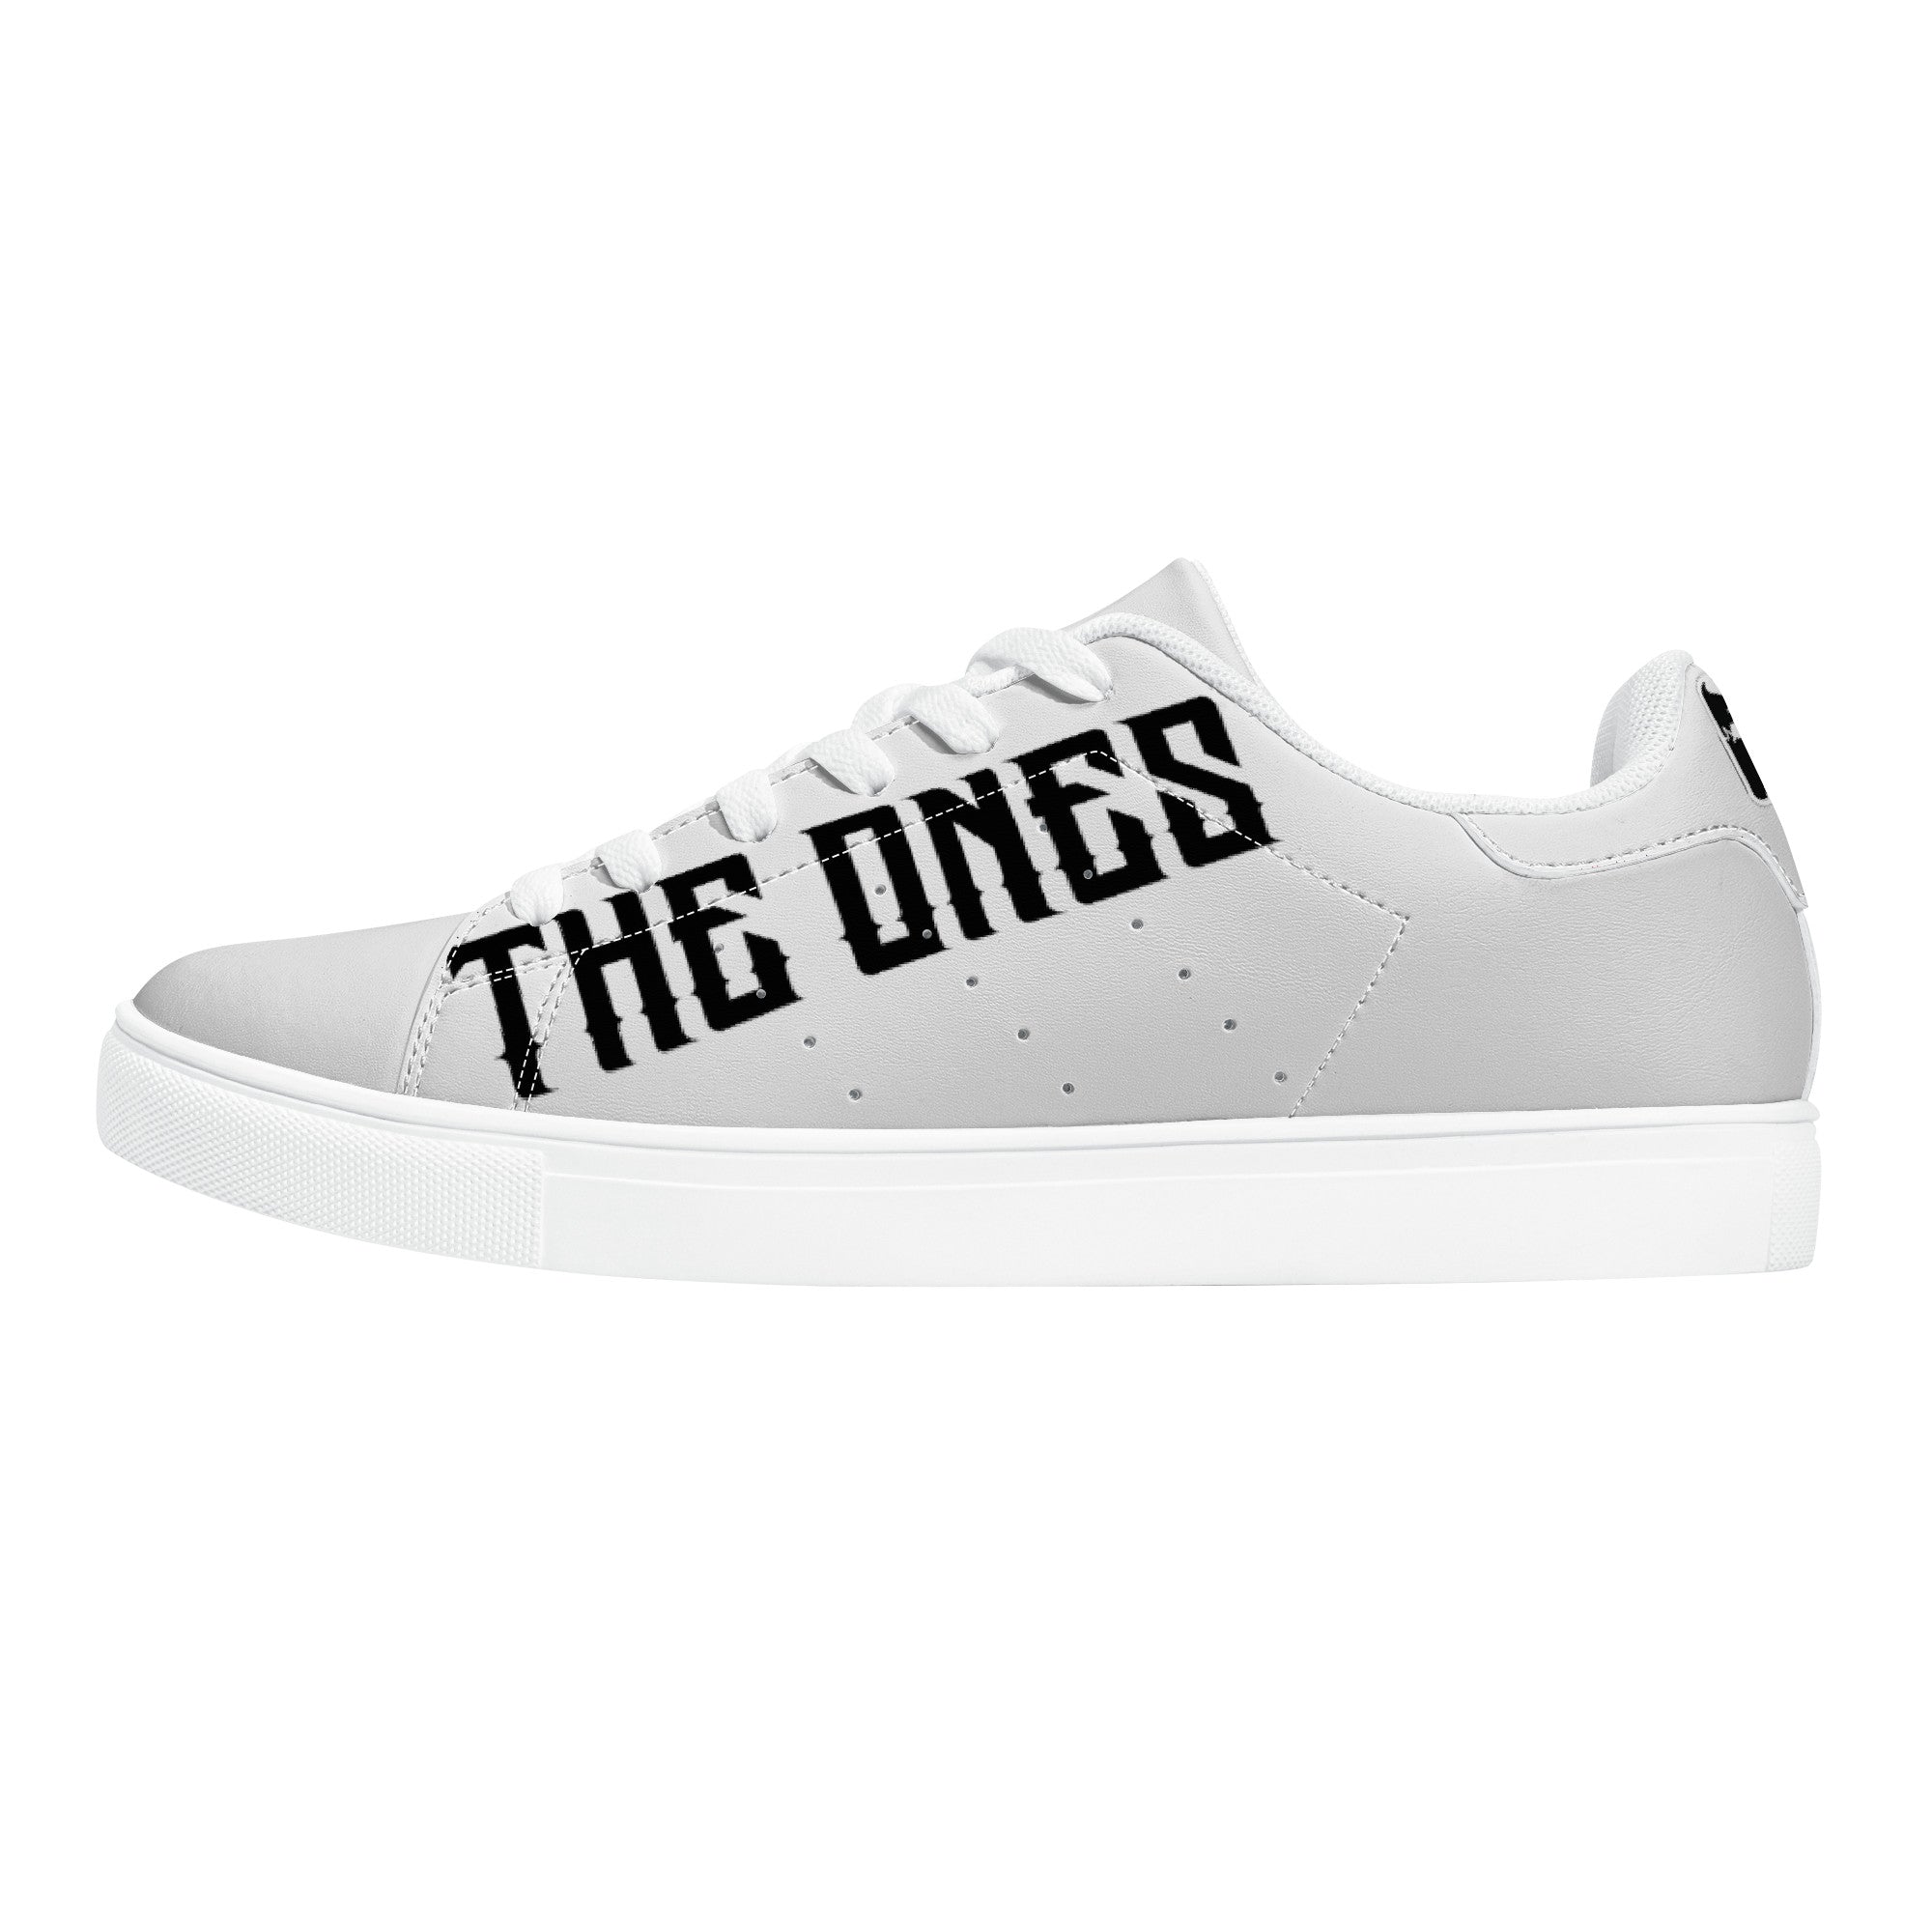 The Ones - Black on White - Low-Top Synthetic Leather Sneakers - Shoe Zero